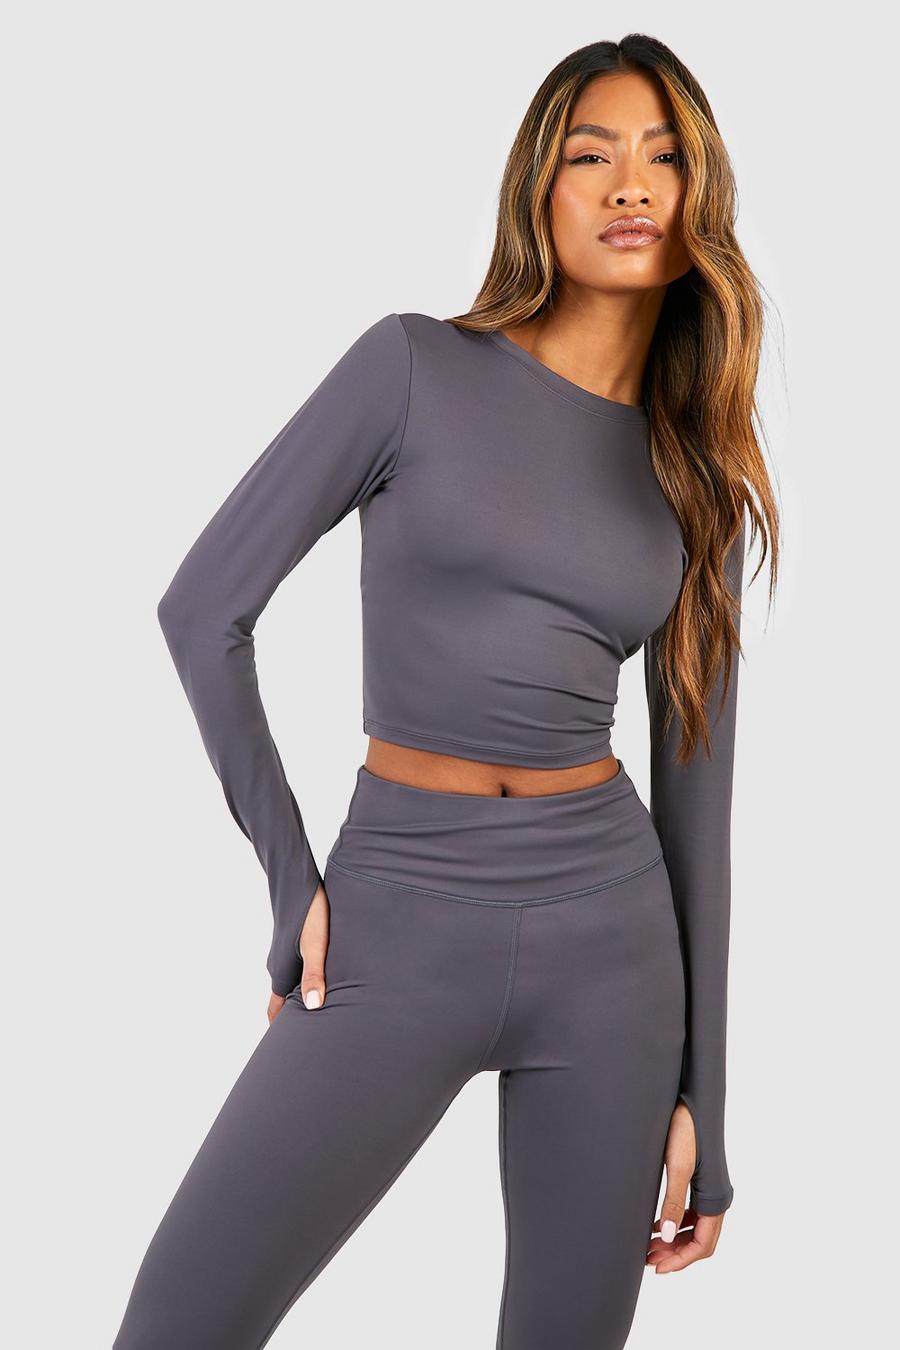 Charcoal DSGN Studio Supersoft Peached Sculpt Long Sleeve Top image number 1